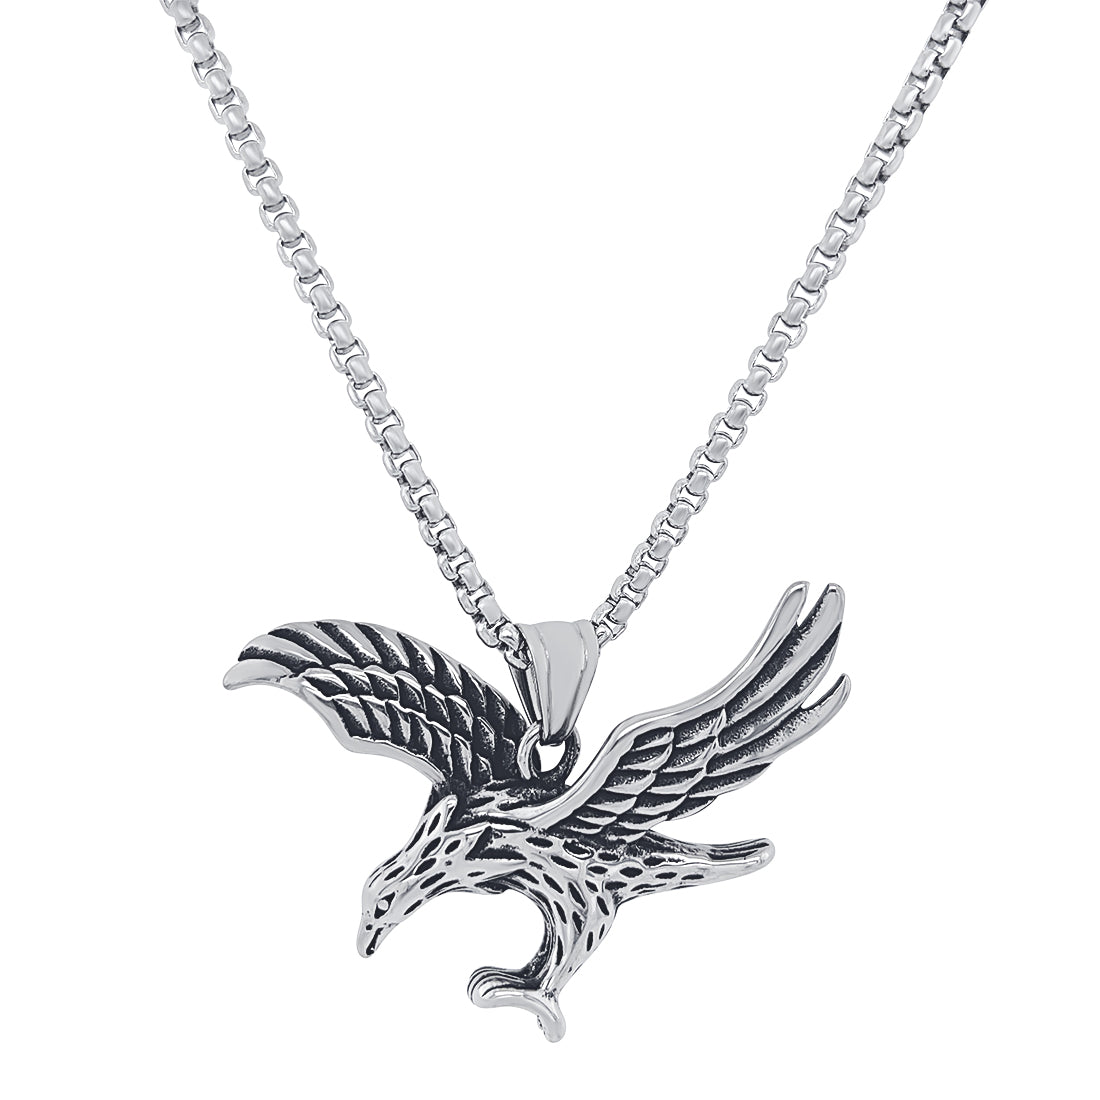 Stainless Steel Eagle Necklace Necklaces Bevilles 